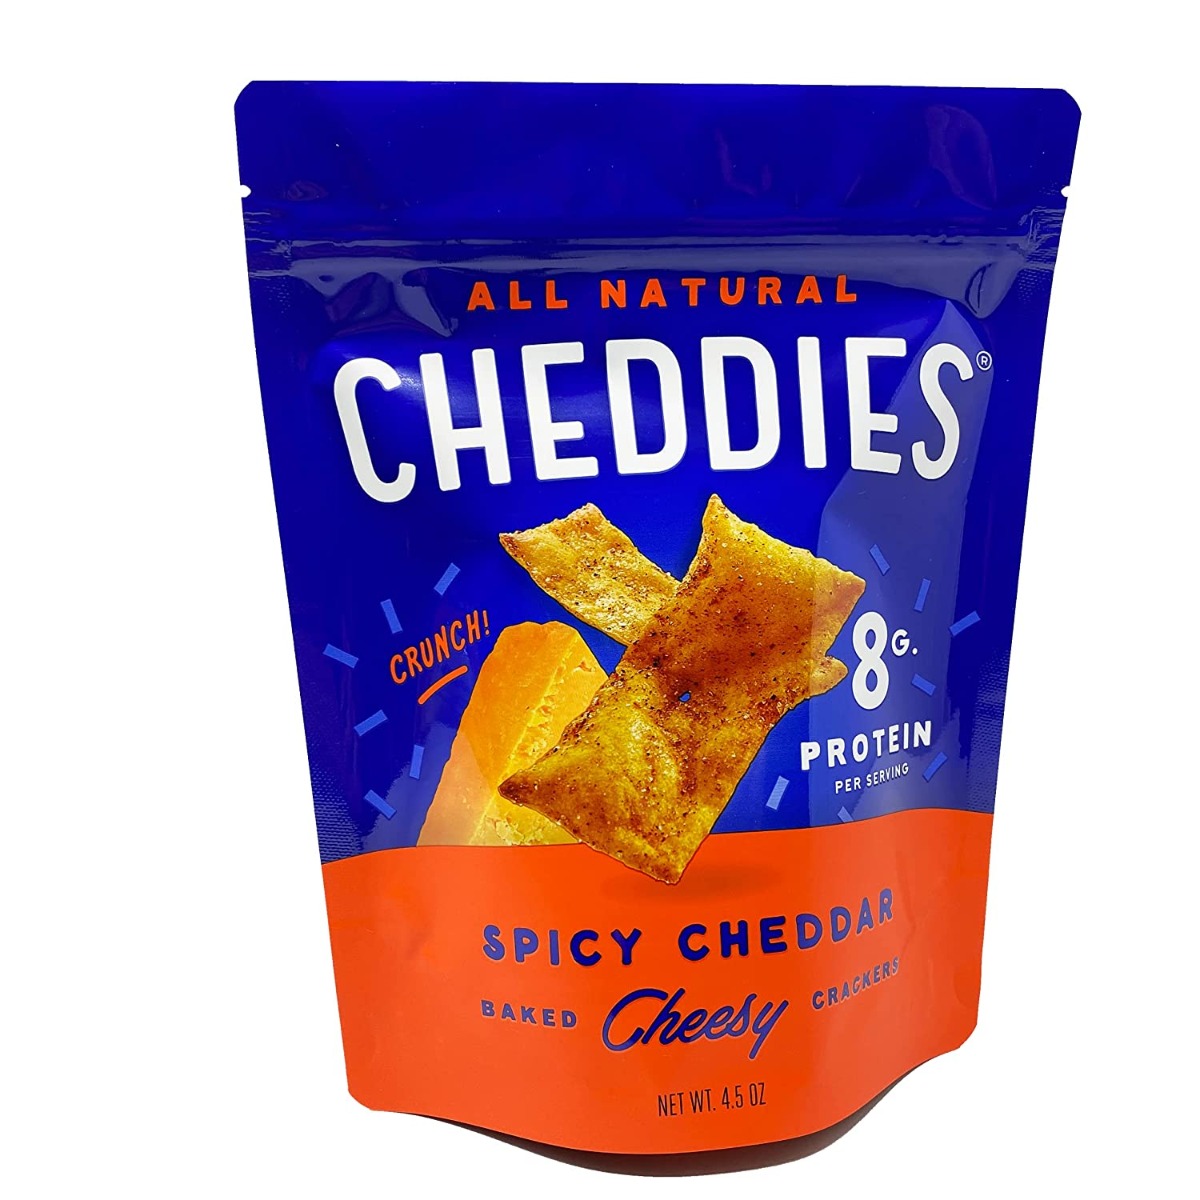 Picture of Cheddies KHRM00383892 4.5 oz Baked Spicy Cheddar Cracker